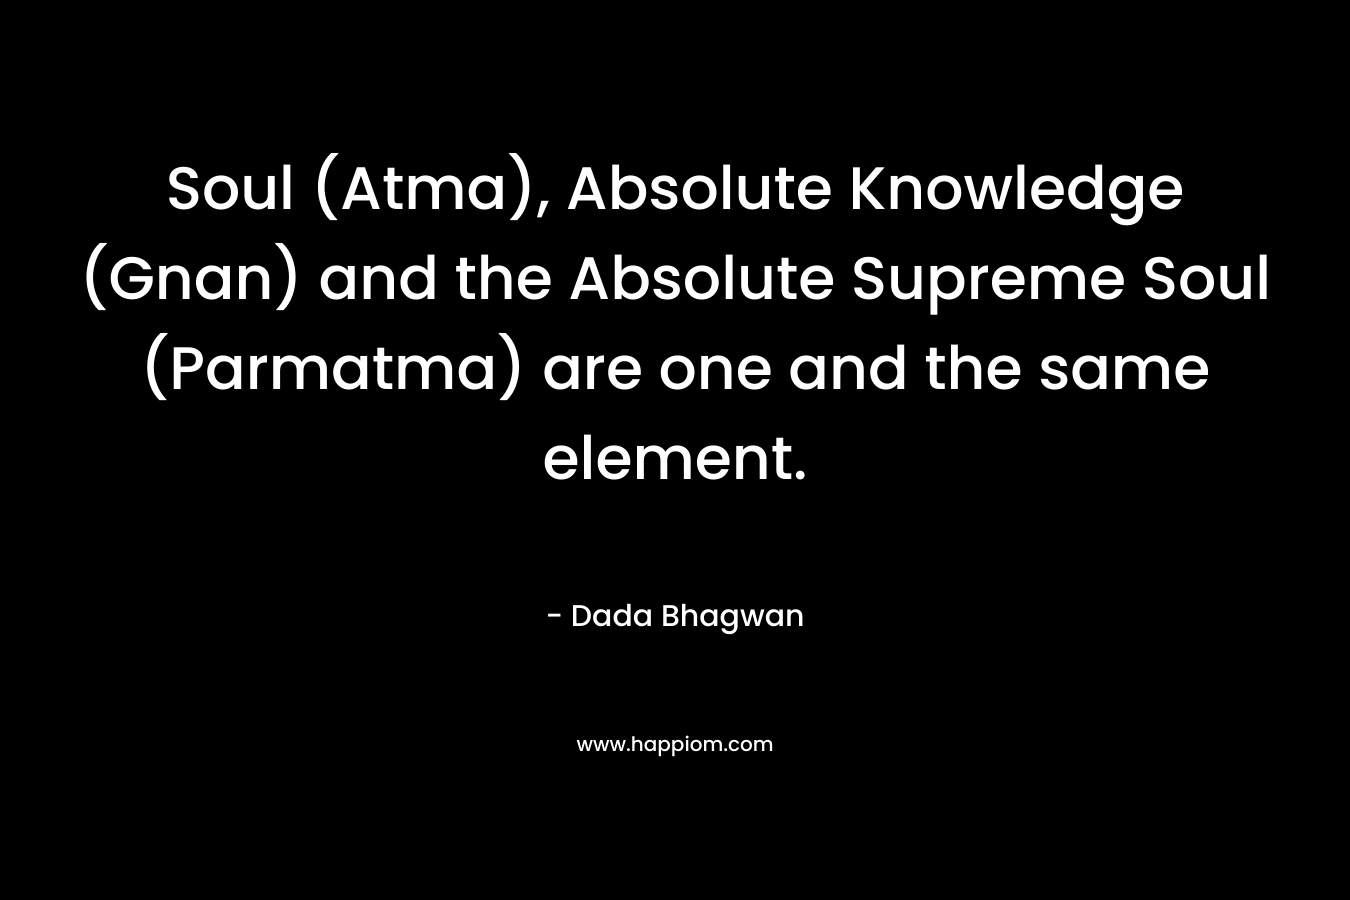 Soul (Atma), Absolute Knowledge (Gnan) and the Absolute Supreme Soul (Parmatma) are one and the same element.